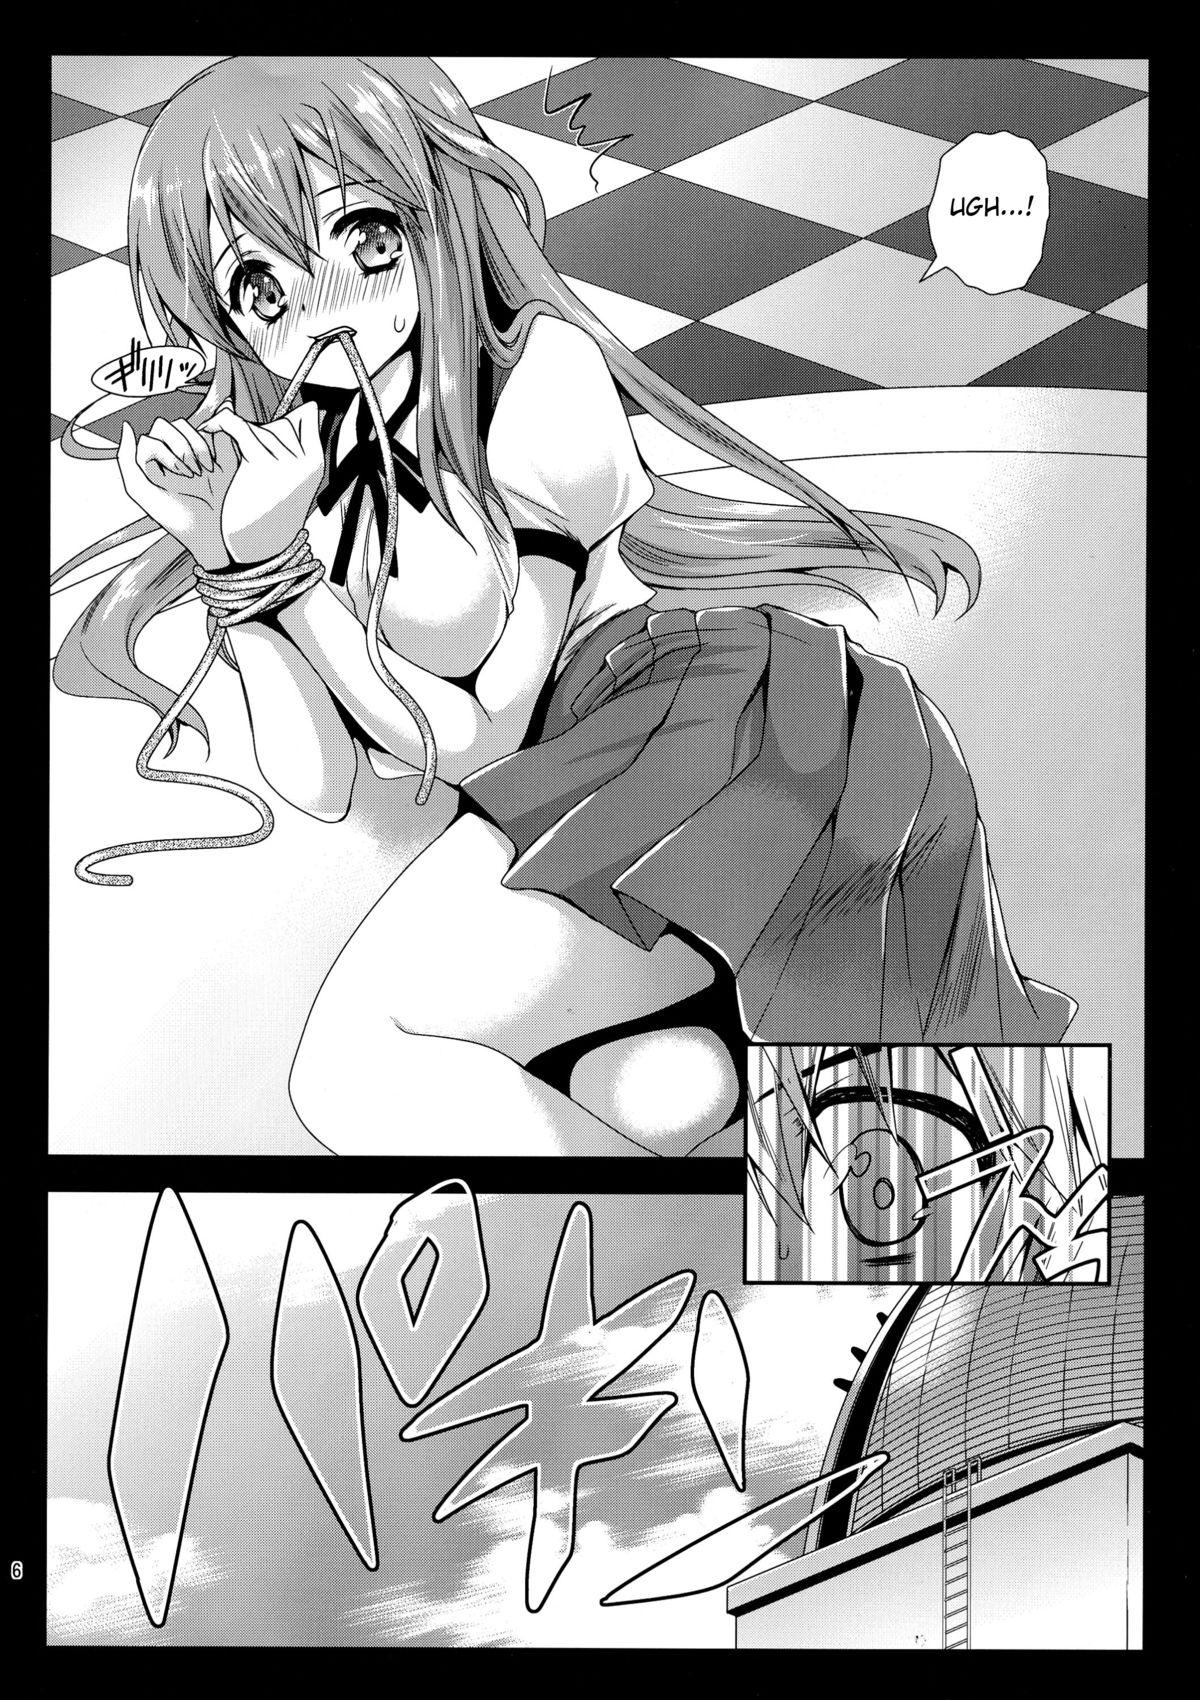 Hard Porn Kotori Hang Up! - Brynhildr in the darkness Cunnilingus - Page 6